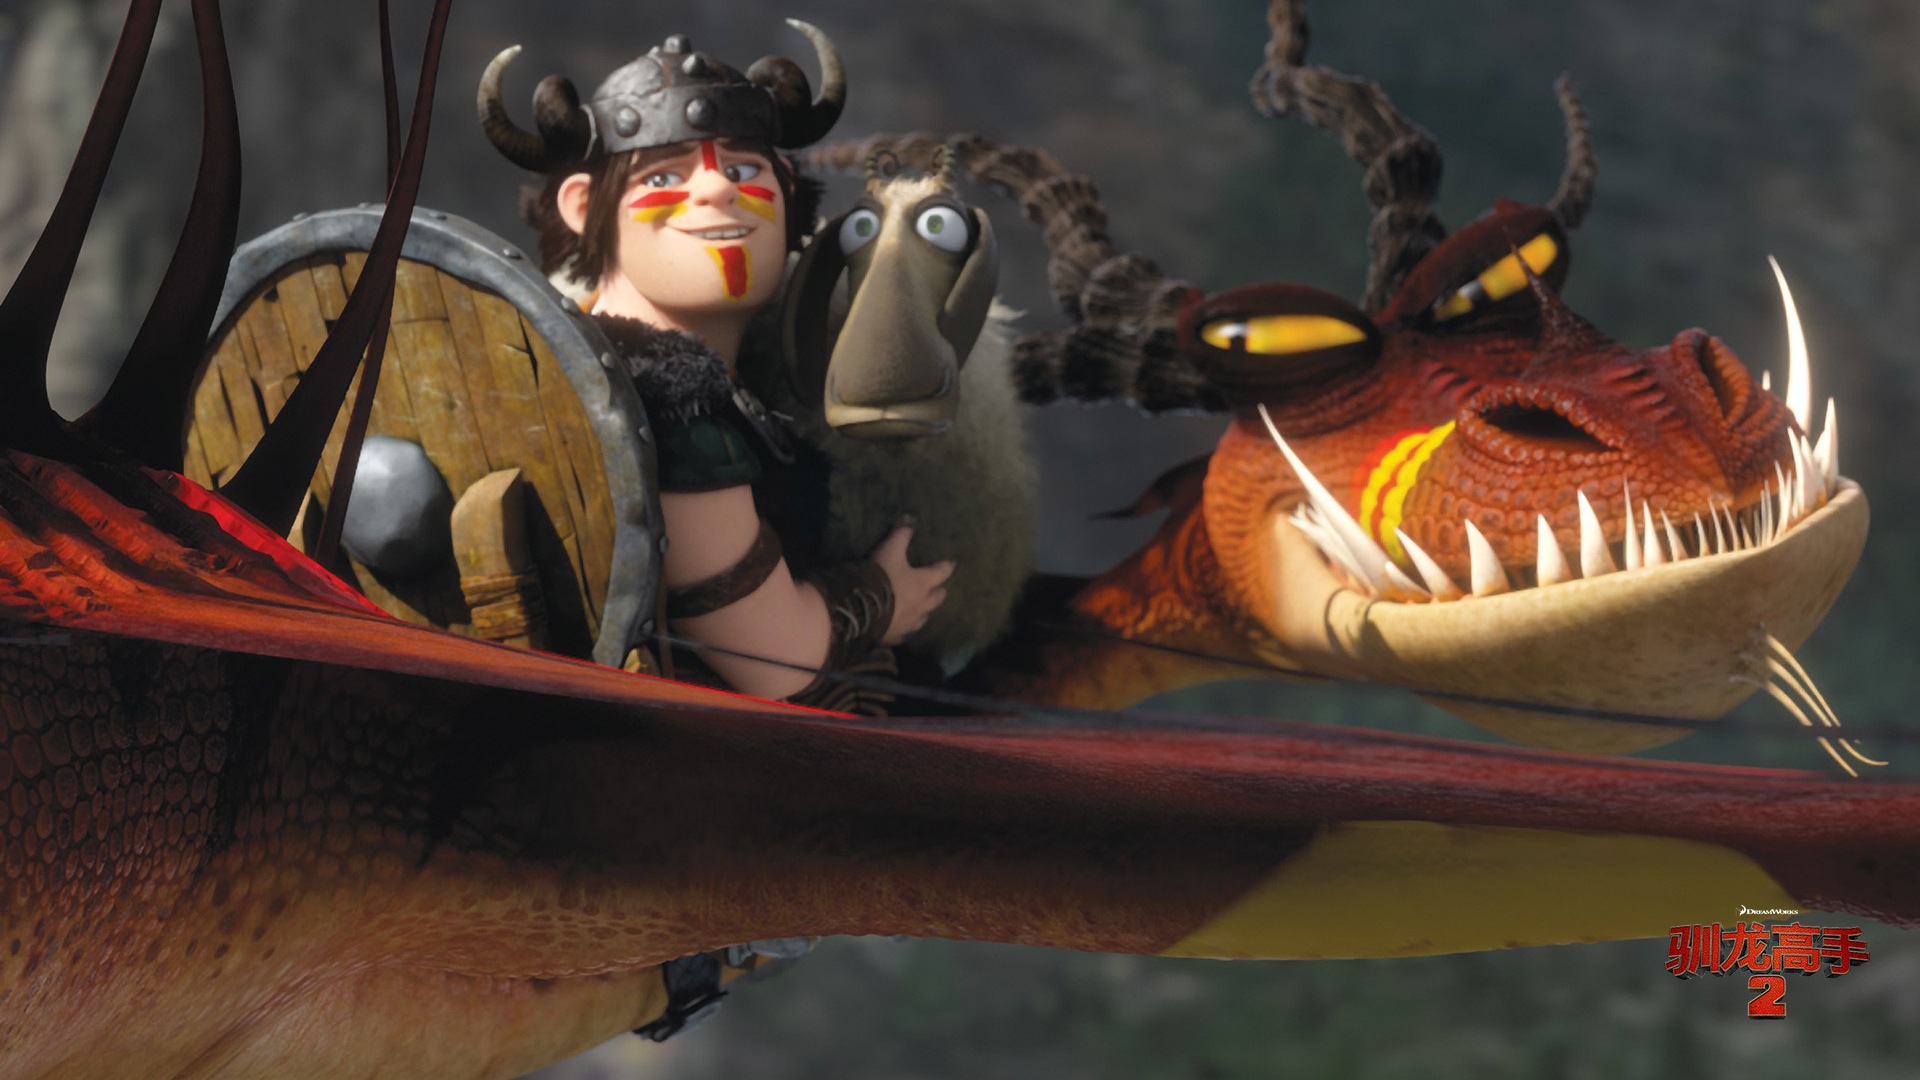 How to Train Your Dragon 2 驯龙高手2 高清壁纸7 - 1920x1080